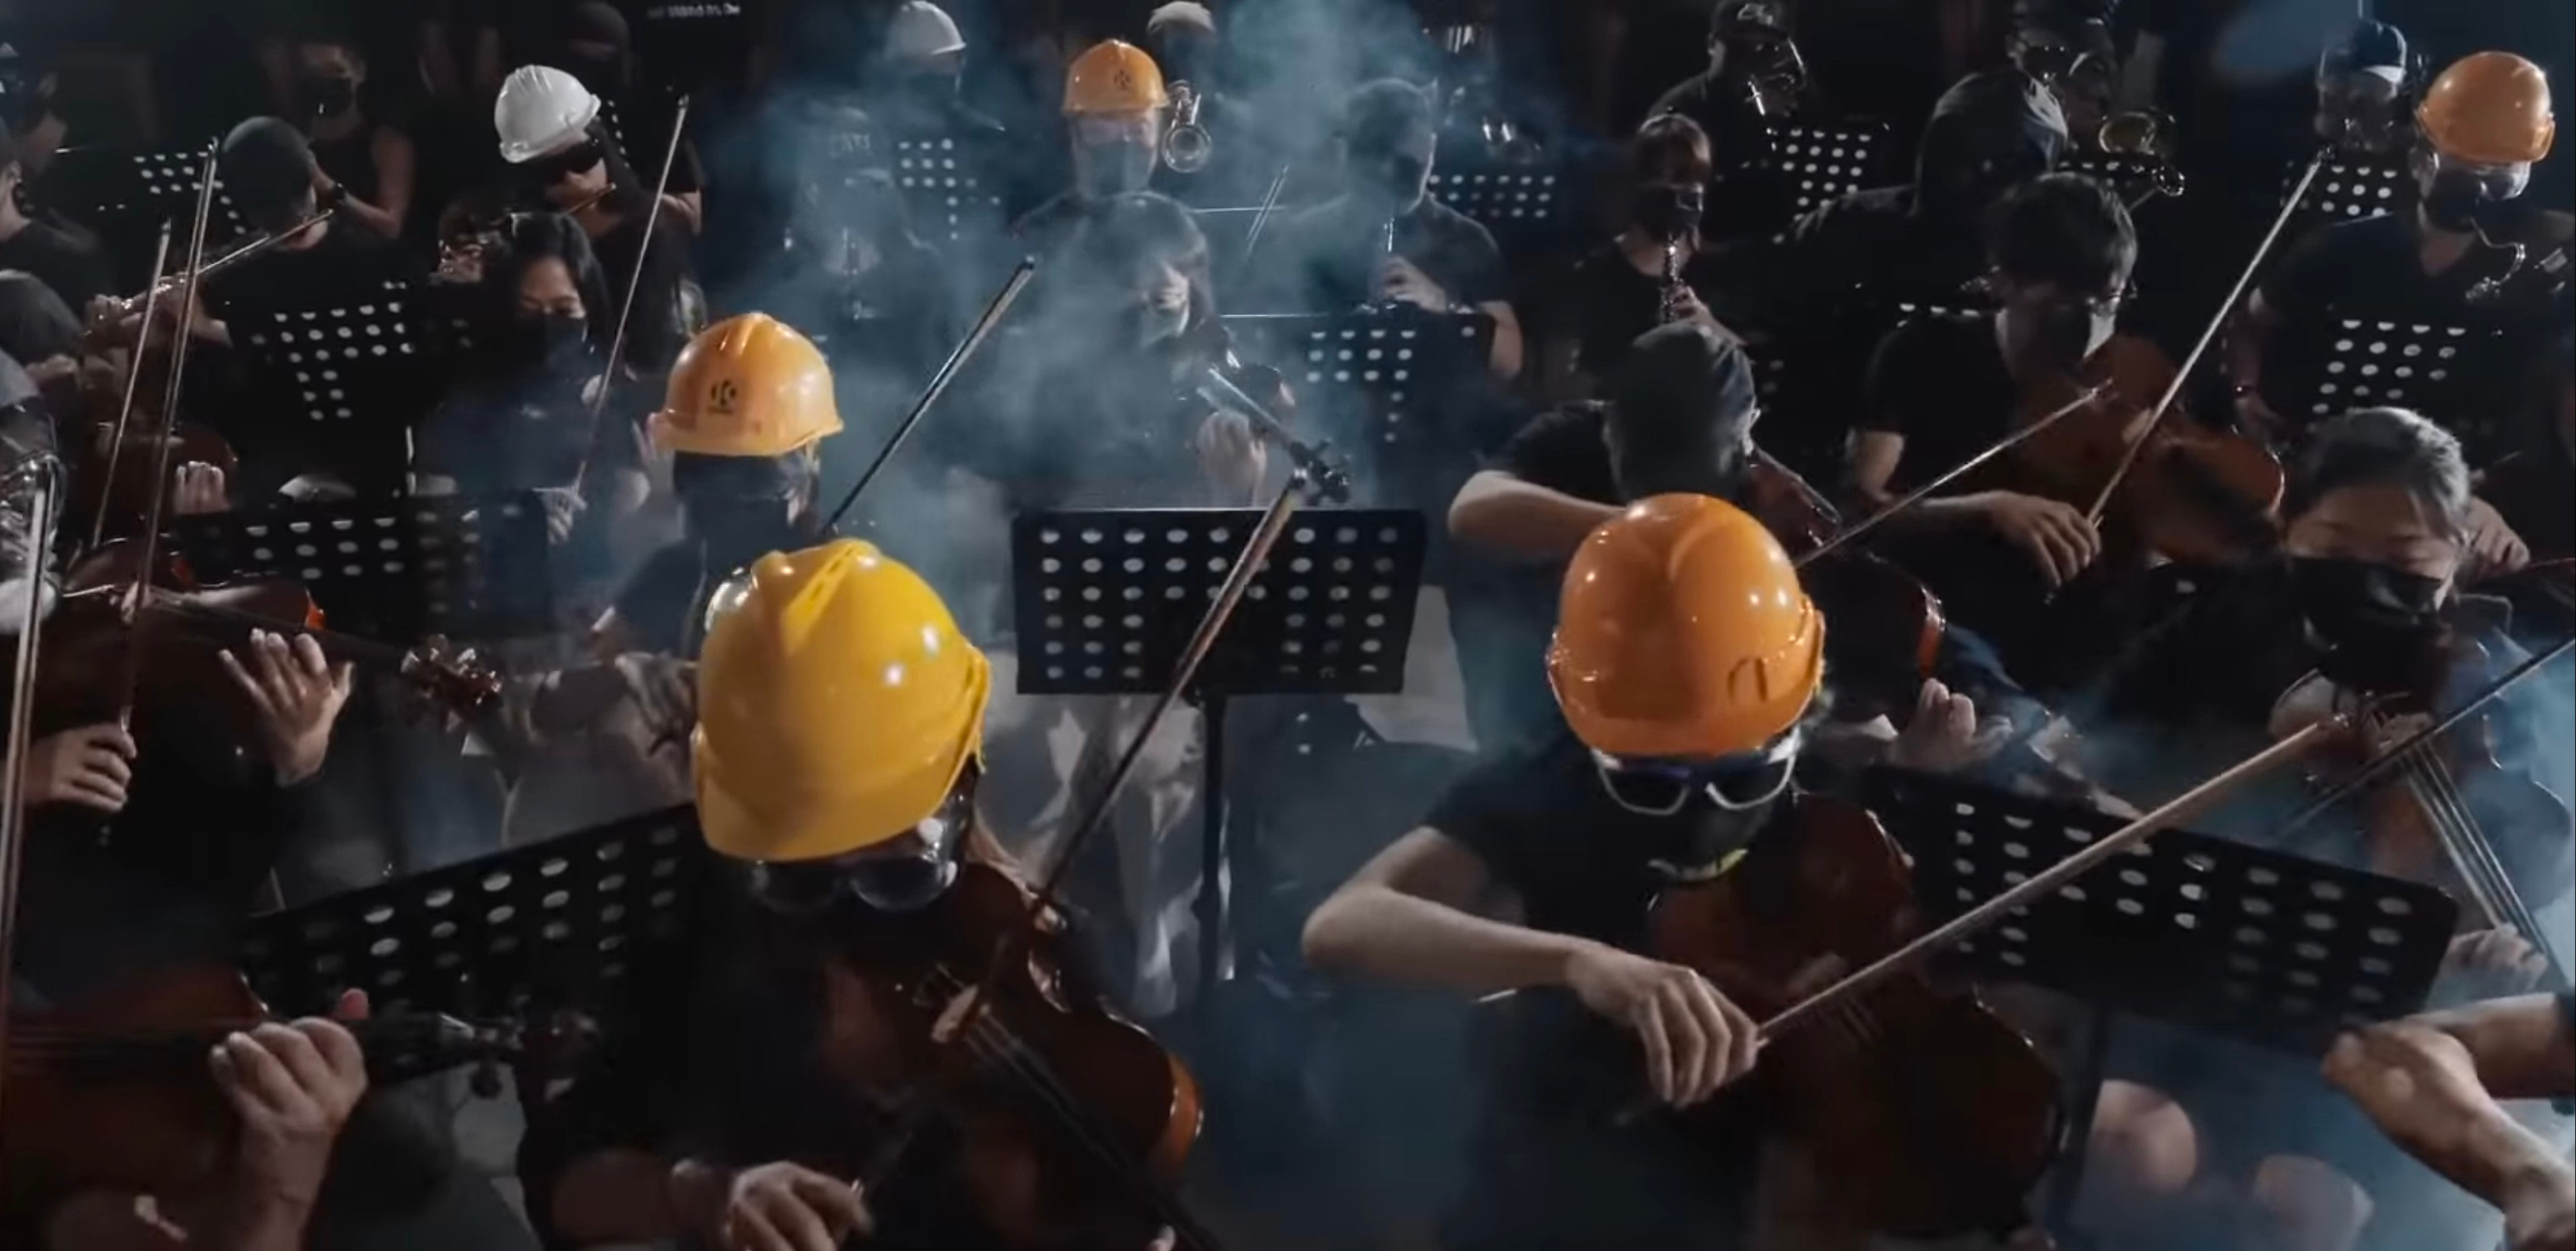 An orchestra in helmets and gas masks performs “Glory to Hong Kong”, which became the anthem of the 2019 protests. Photo: YouTube